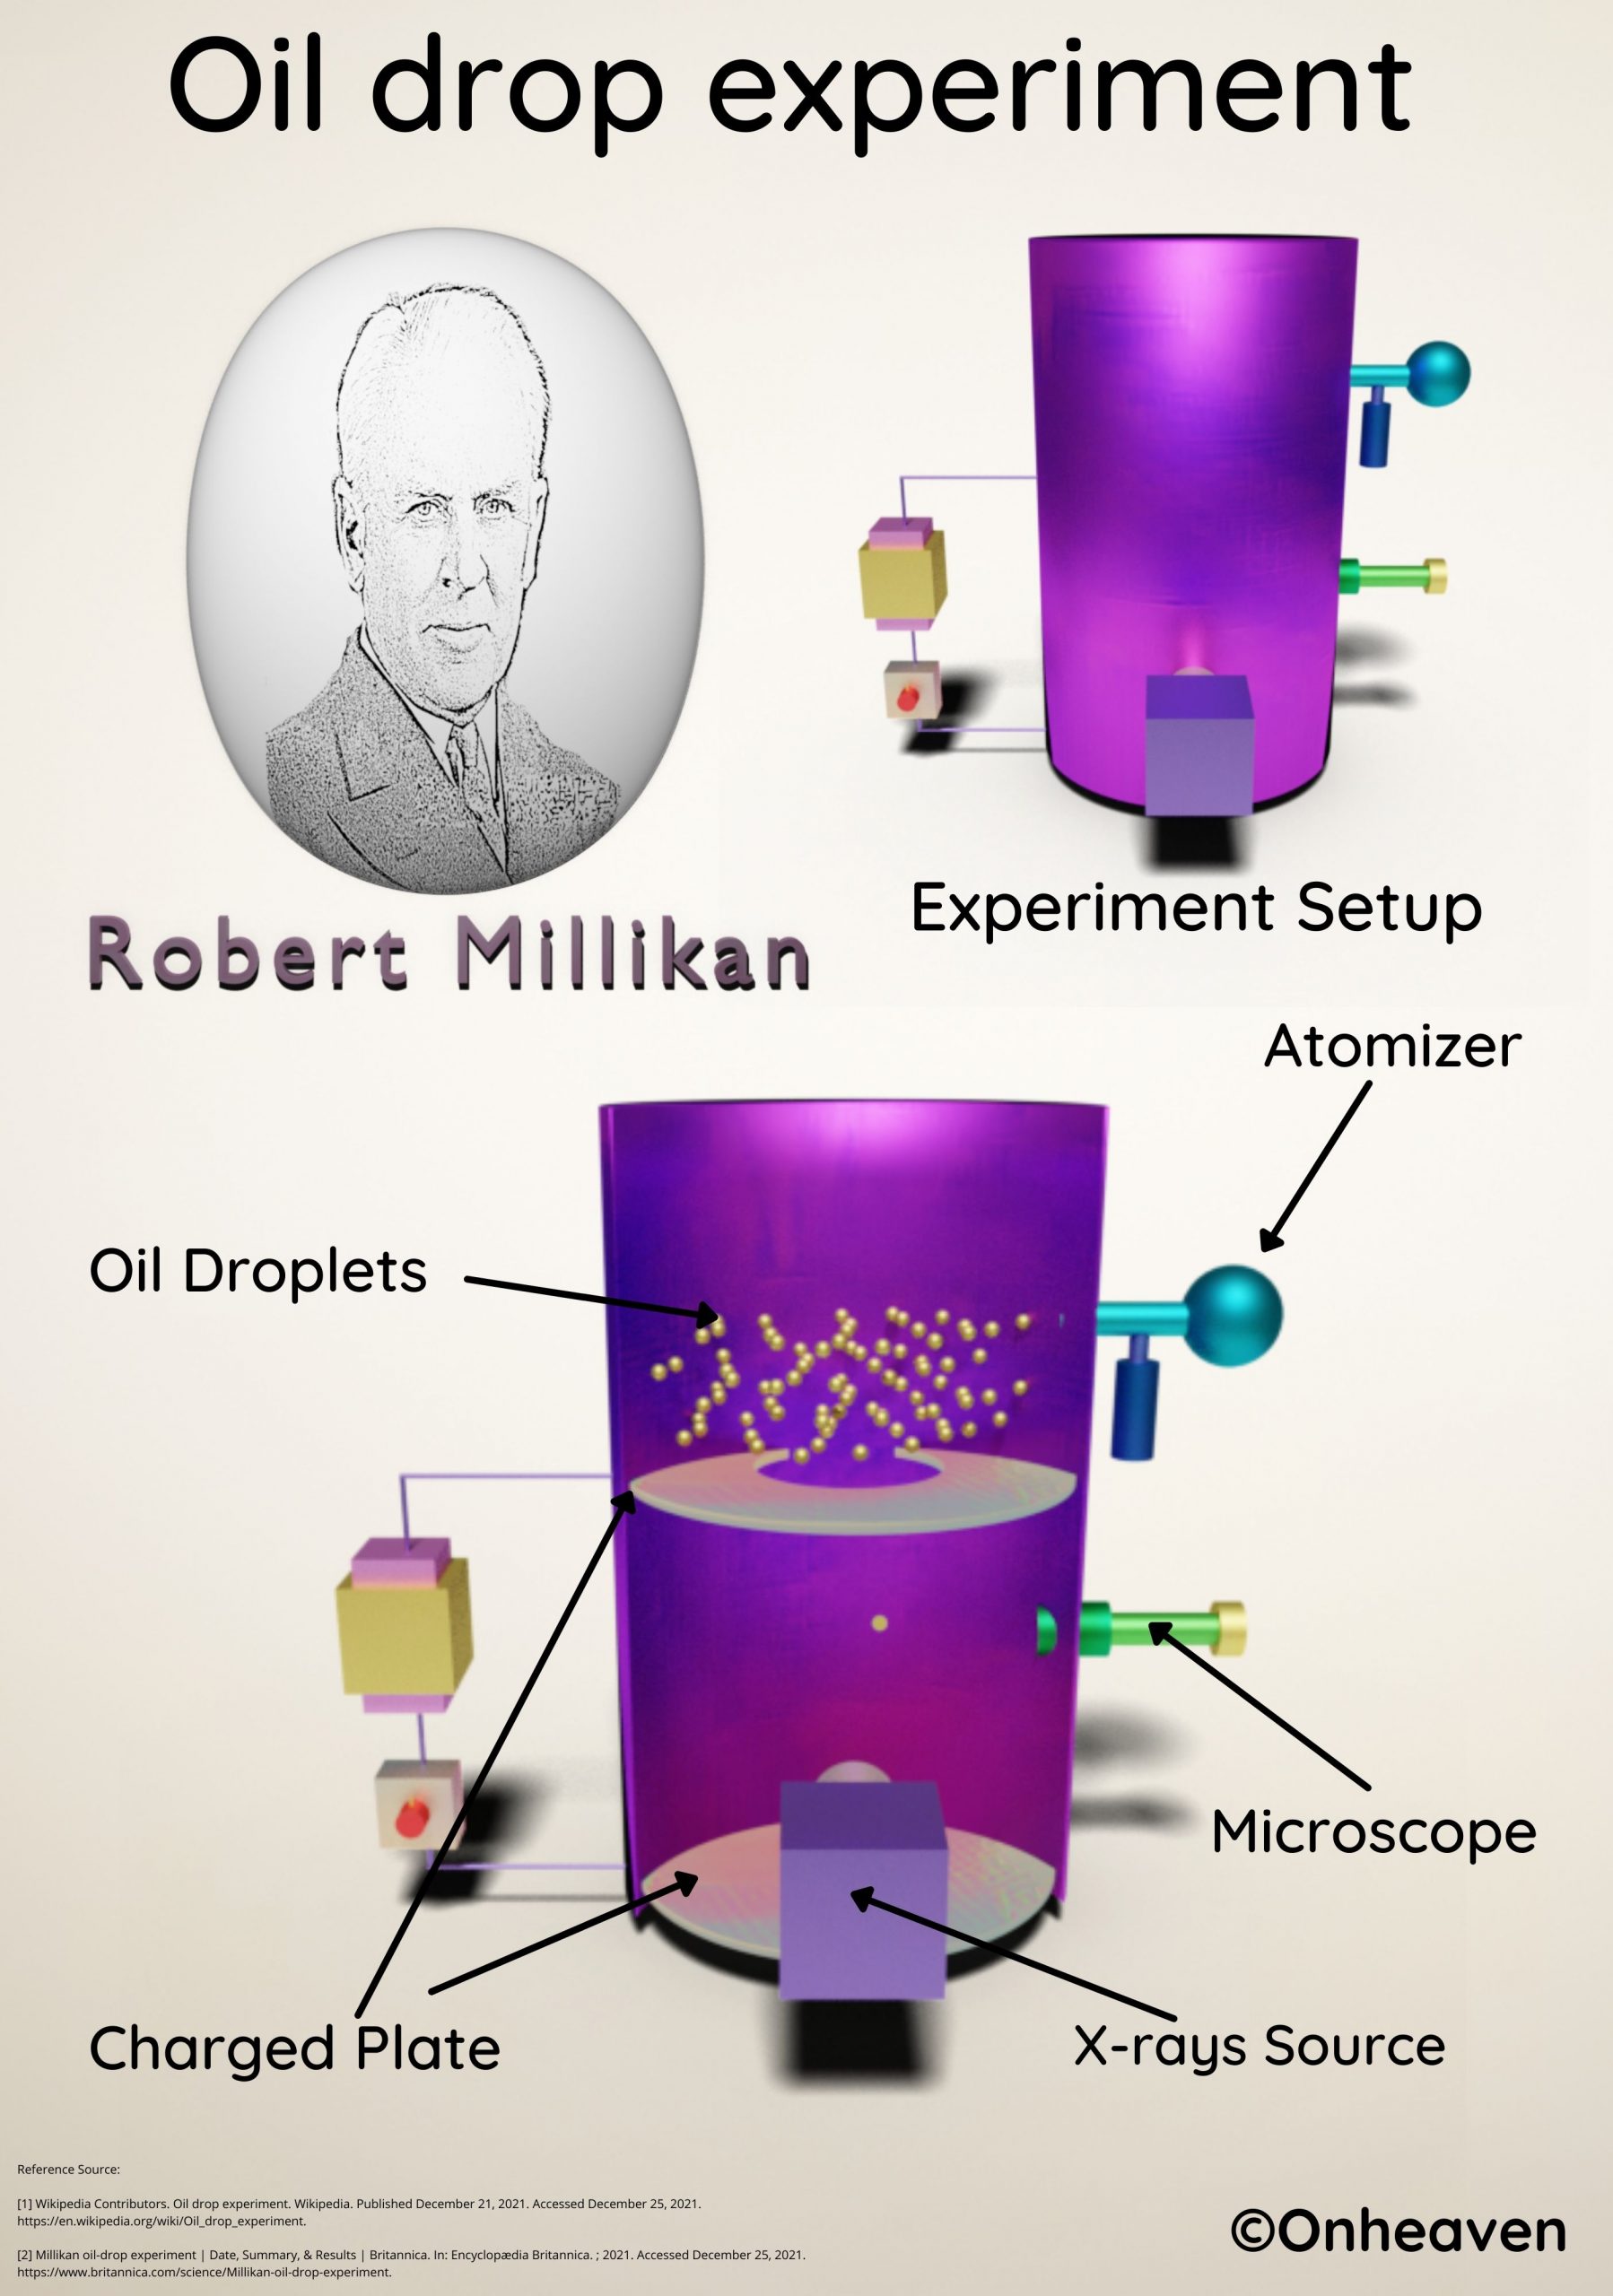 results of millikan's oil drop experiment